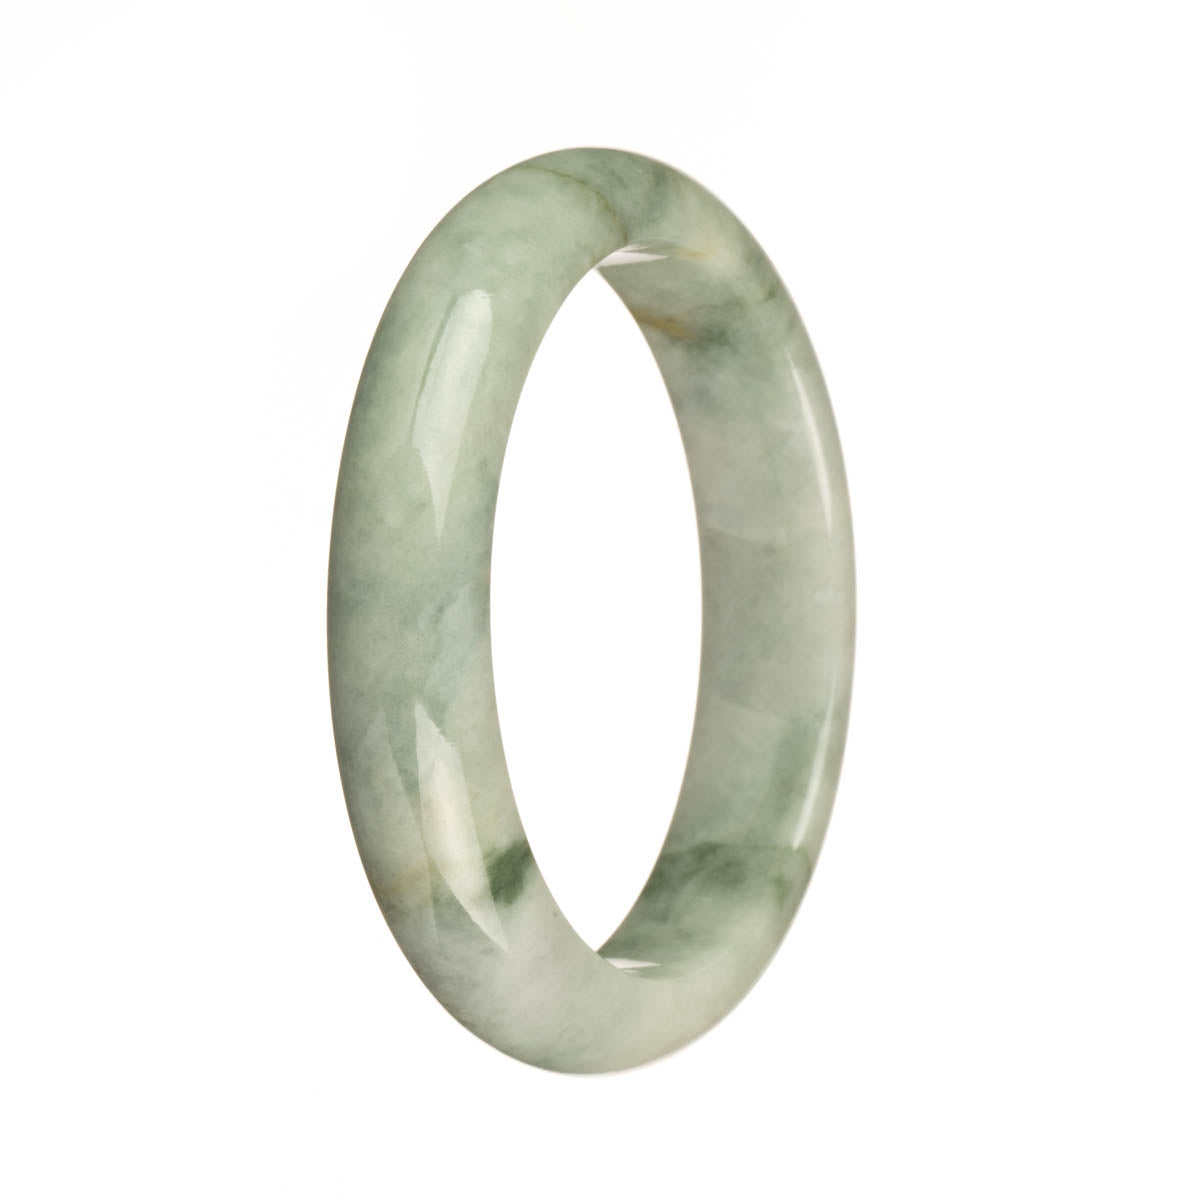 Genuine Natural Pale Green with Dark Green and Brown Patch Burma Jade Bangle Bracelet - 58mm Half Moon